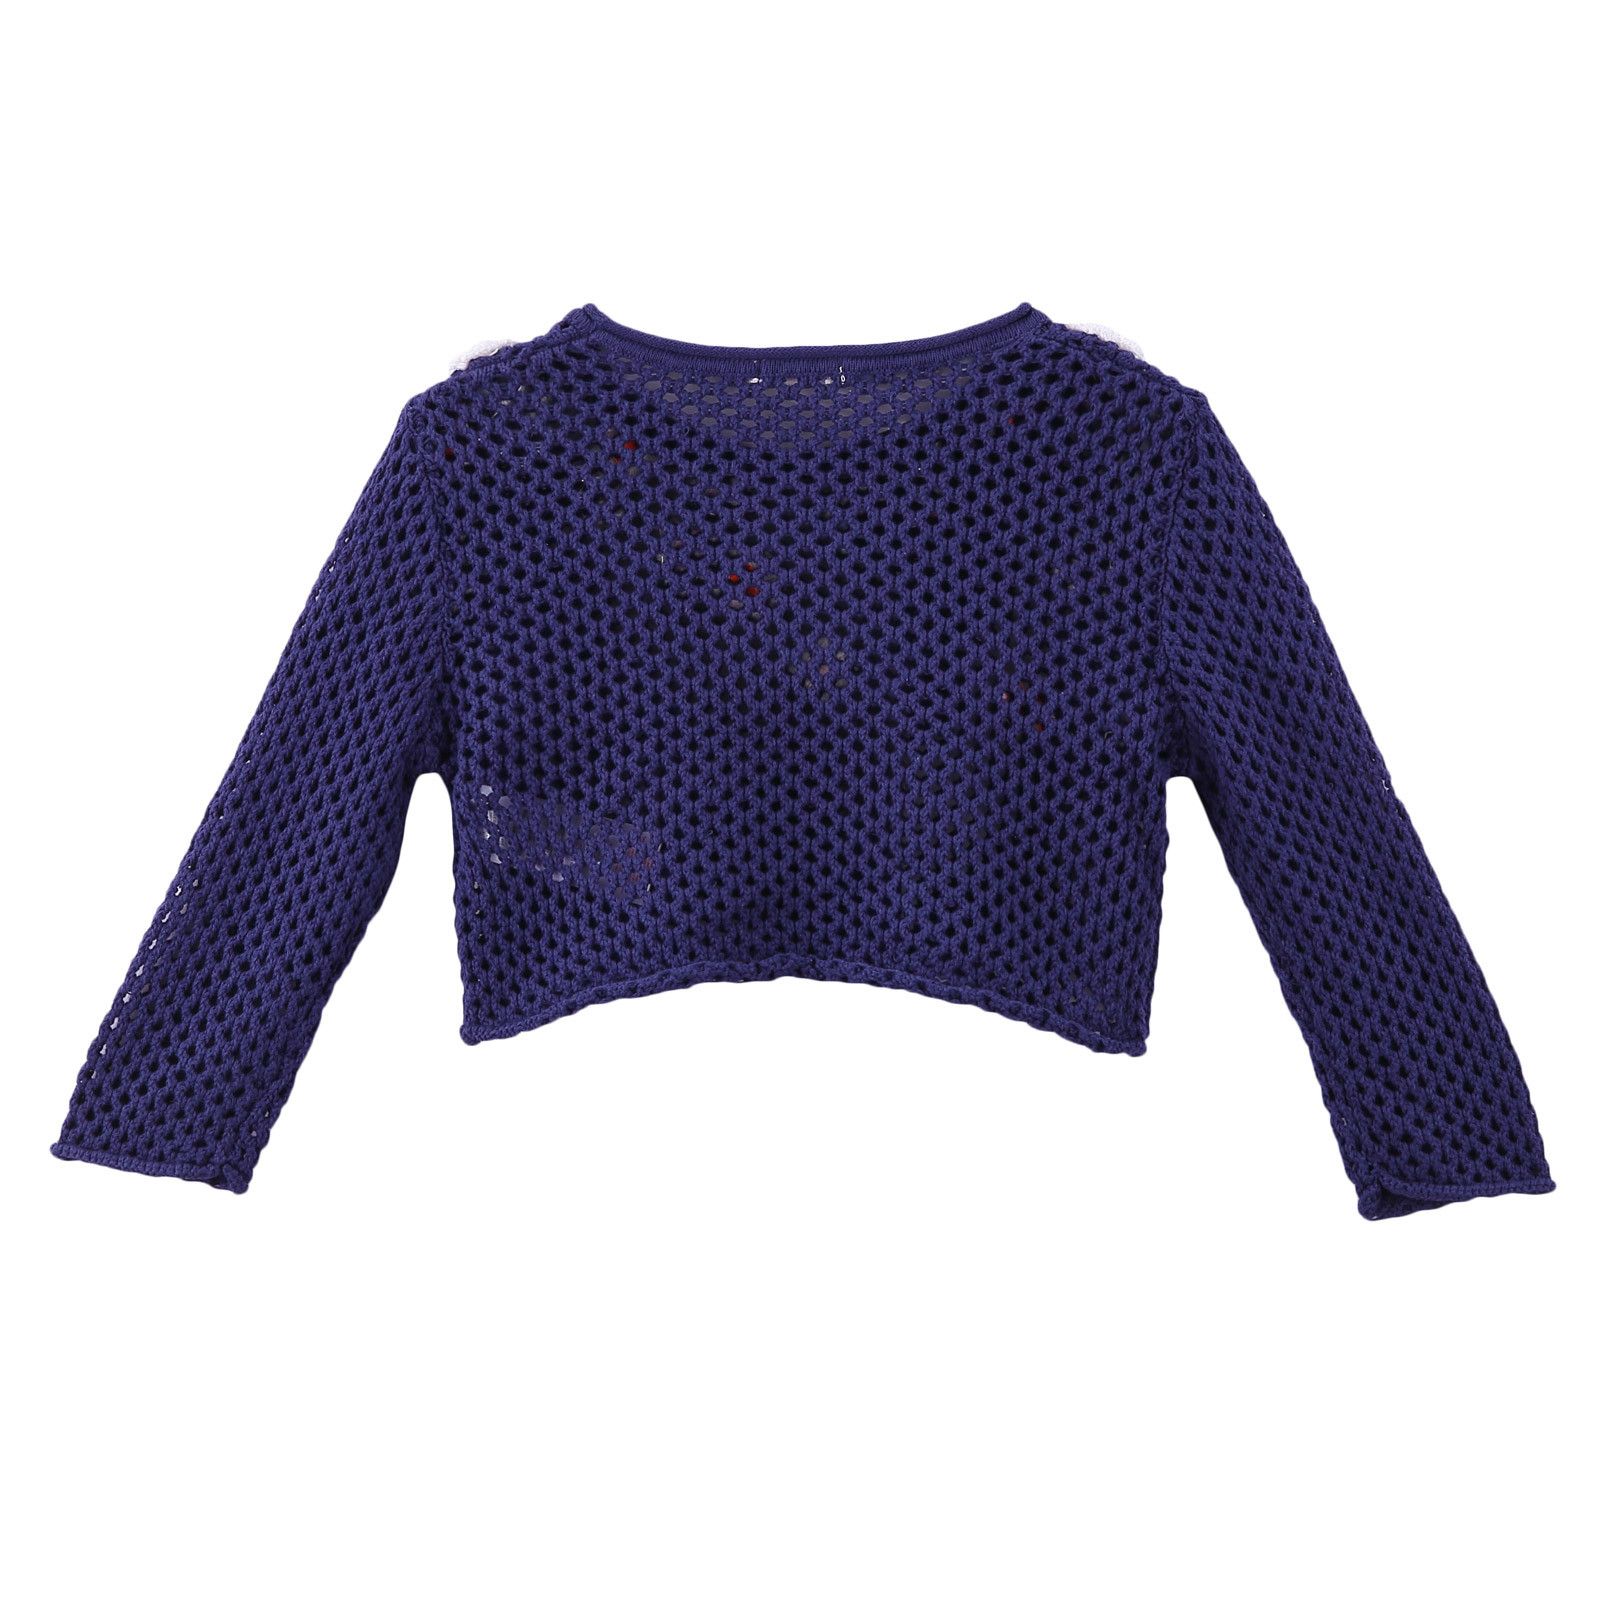 Girls Navy Blue Knitted Cotton Sweater With Patch Flower Trims - CÉMAROSE | Children's Fashion Store - 2